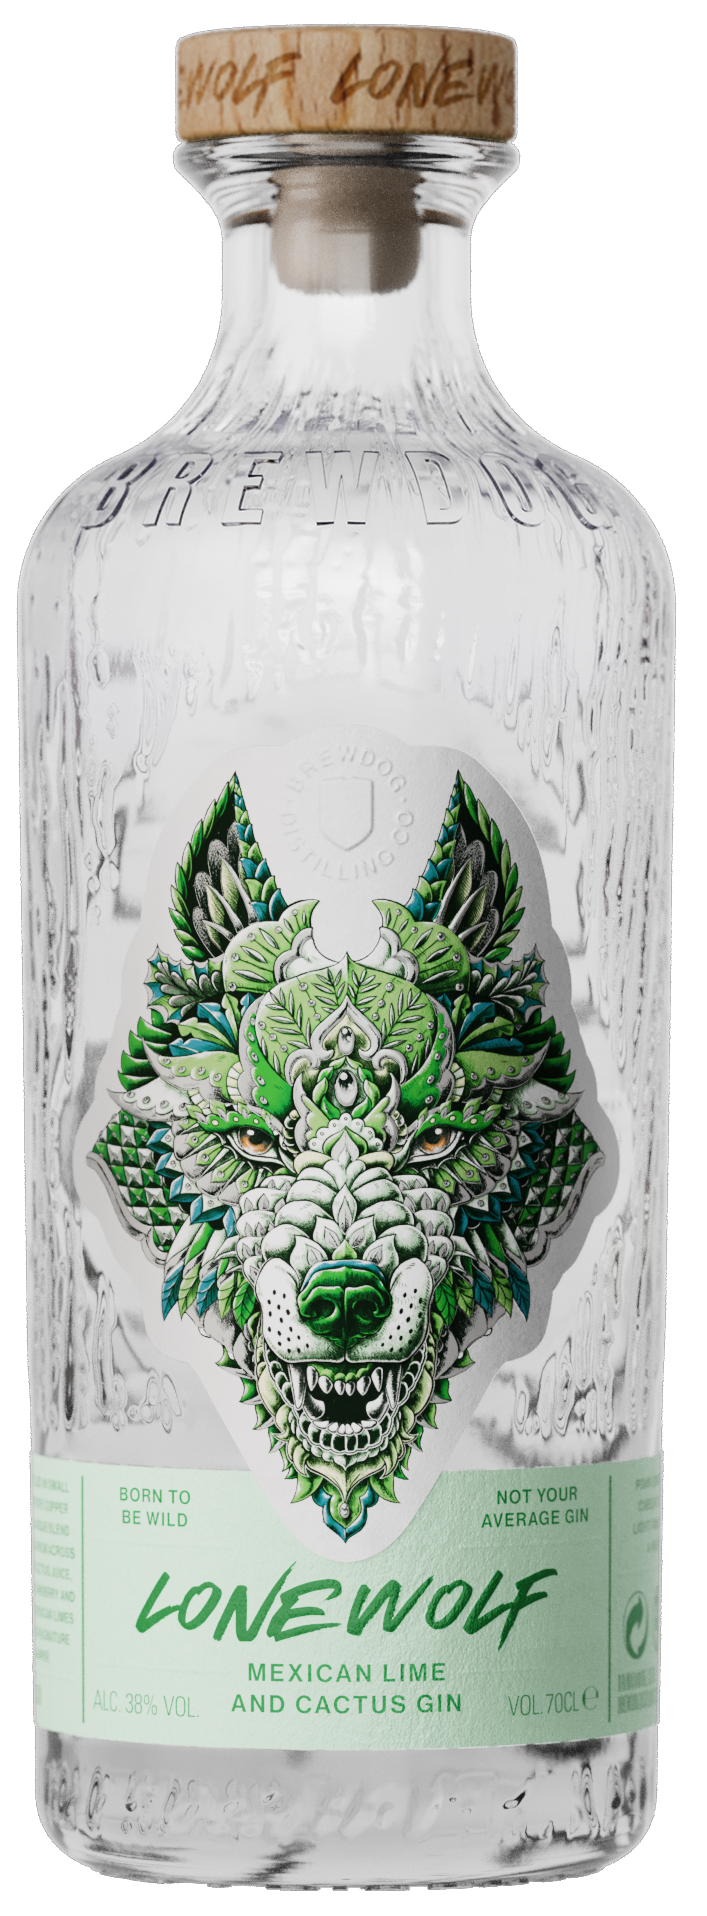 LONEWOLF MEXICAN LIME & CACTUS GIN 38% 70CL